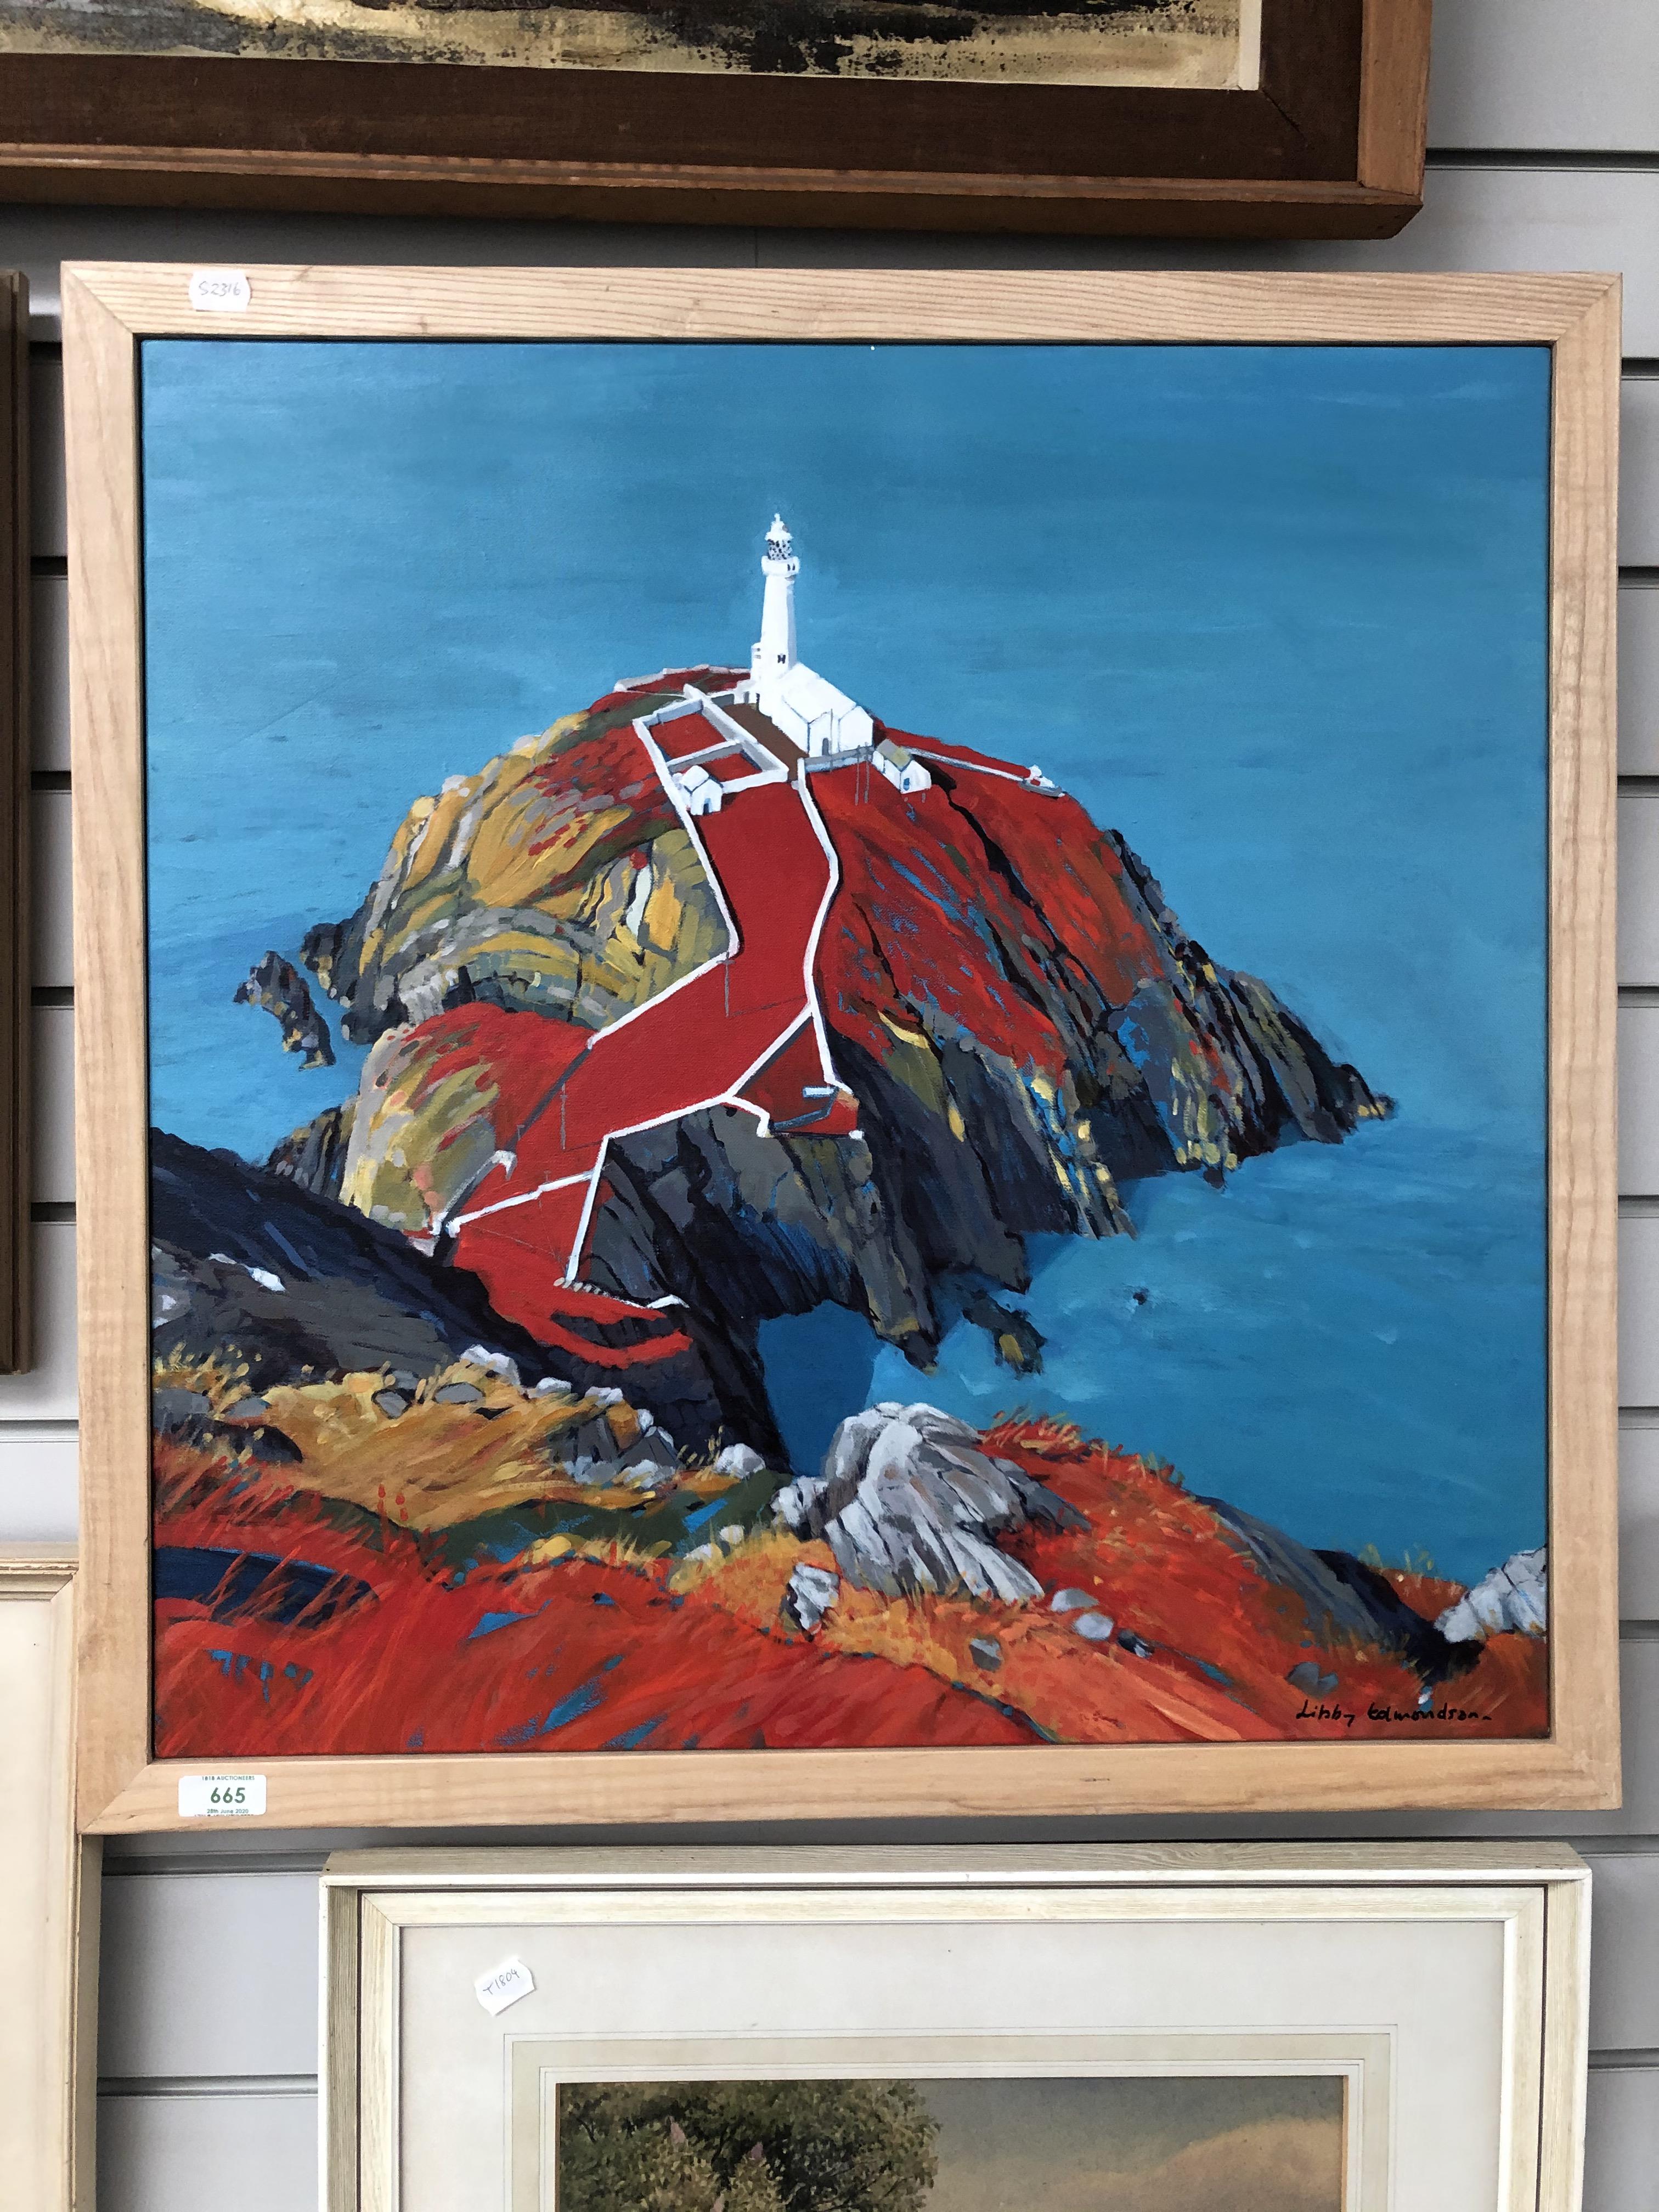 An acrylic painting on canvas, Libby Edmondson, South Stack Lighthouse, Anglesey, signed, 24inx24in